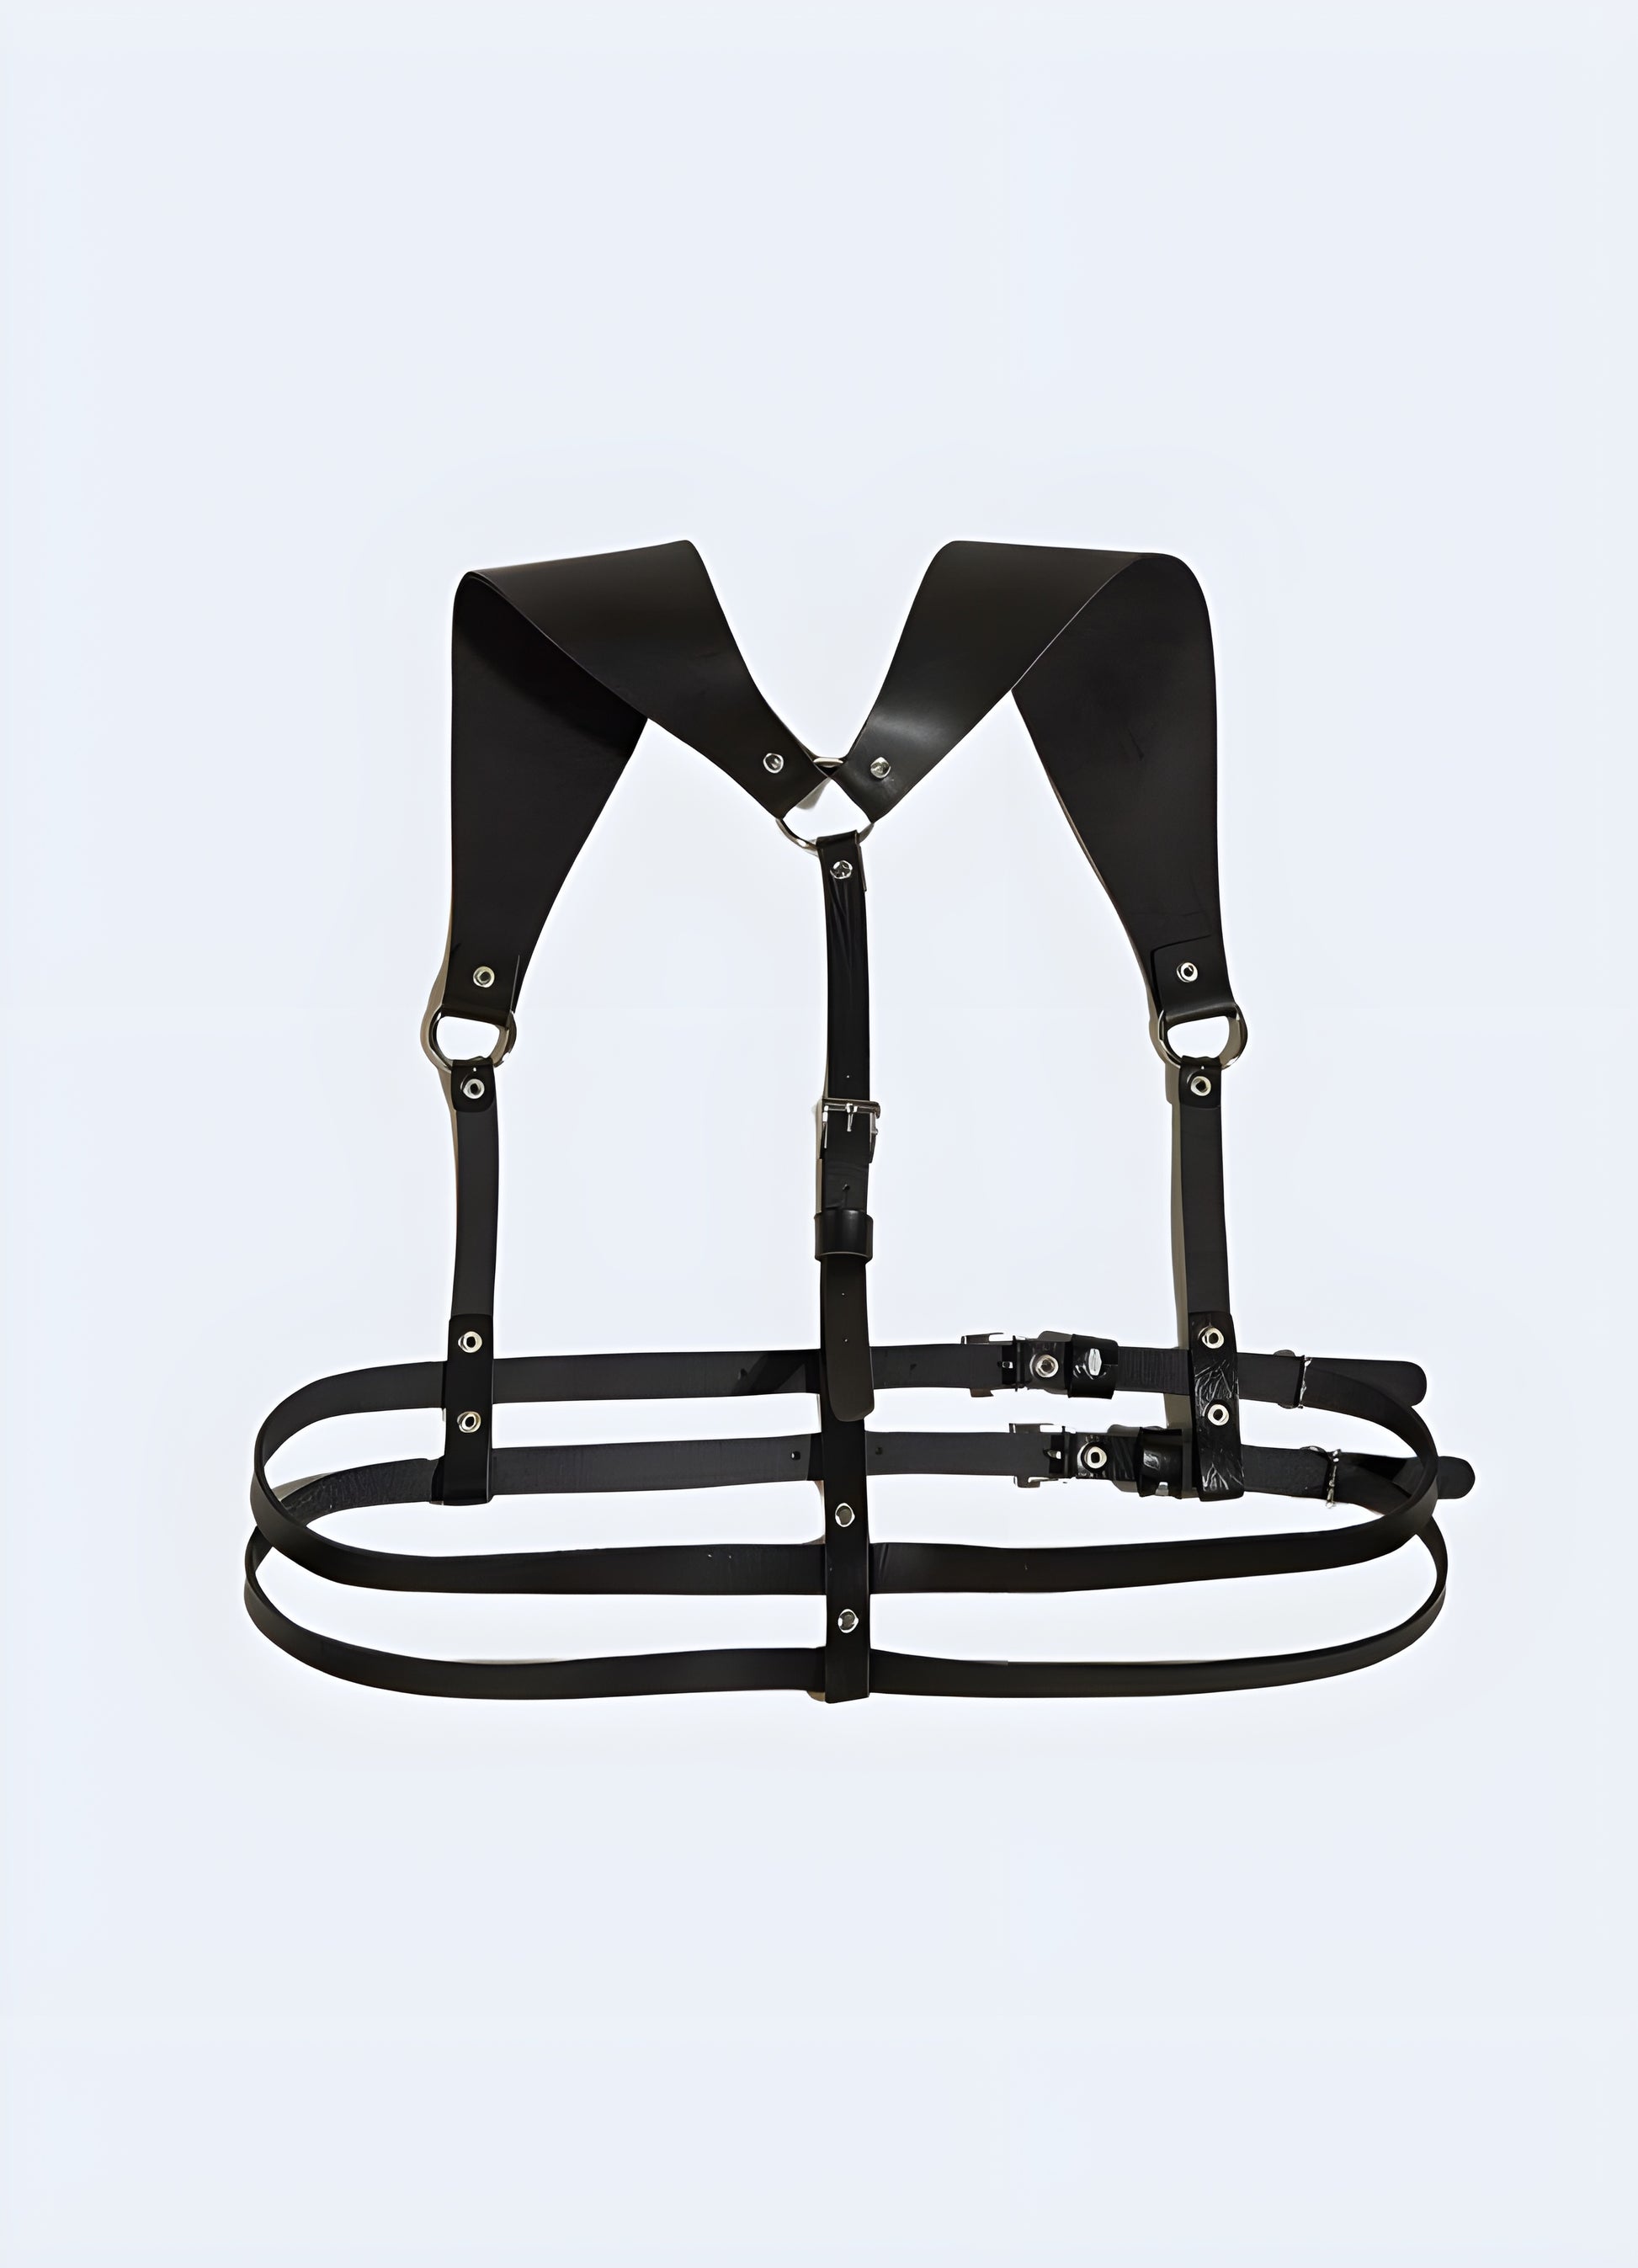 Minimalist harness with adjustable straps crafted for everyone.